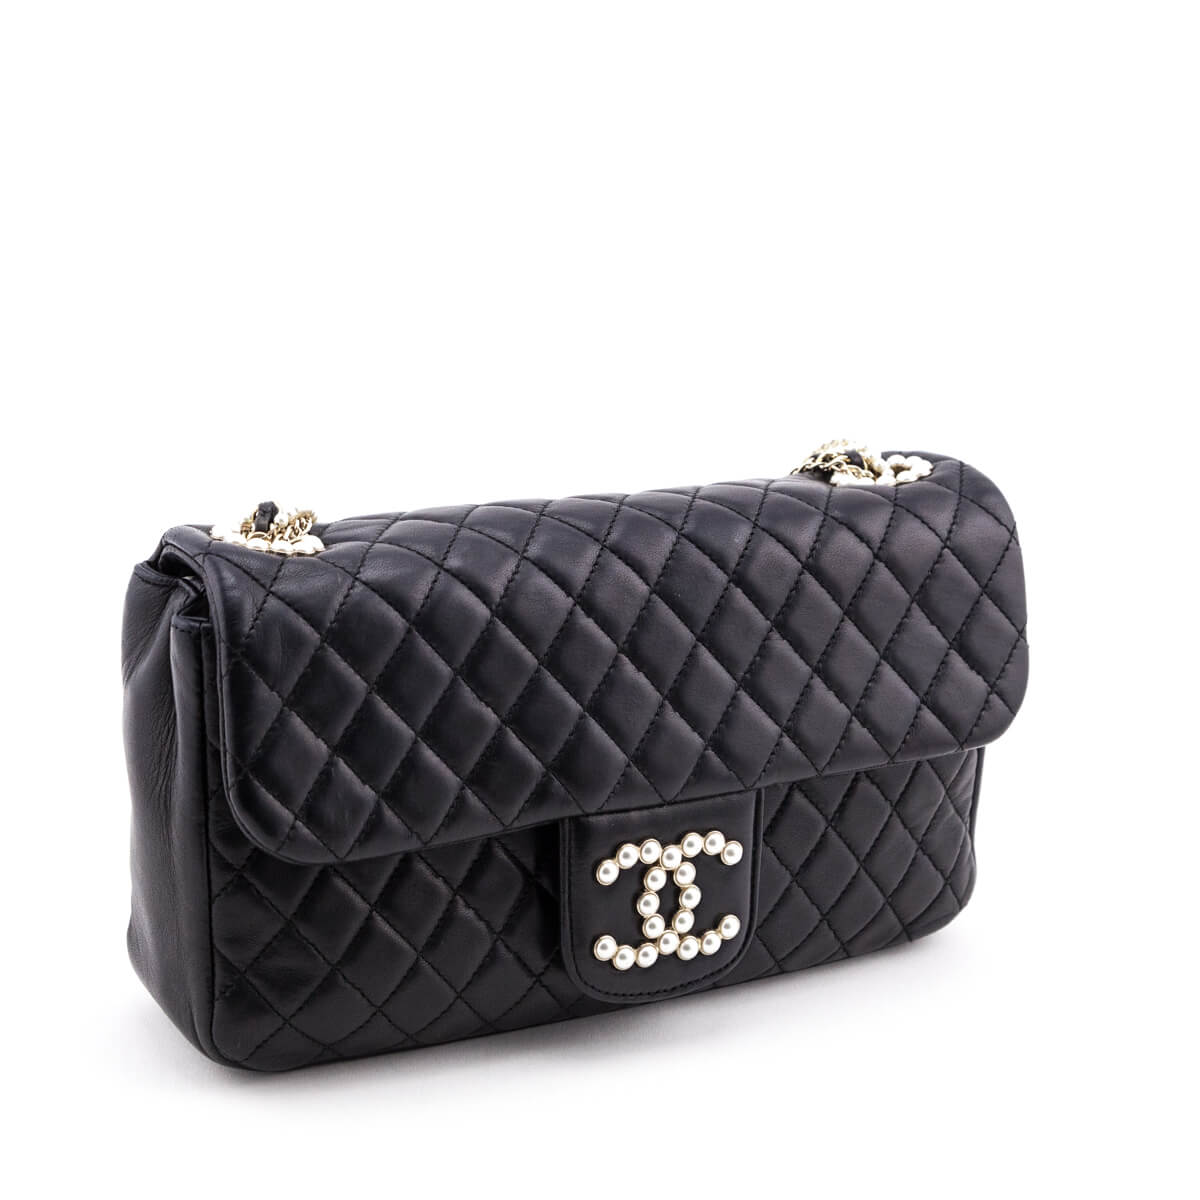 Chanel Black Quilted Lambskin Medium Westminster Flap Bag - Chanel